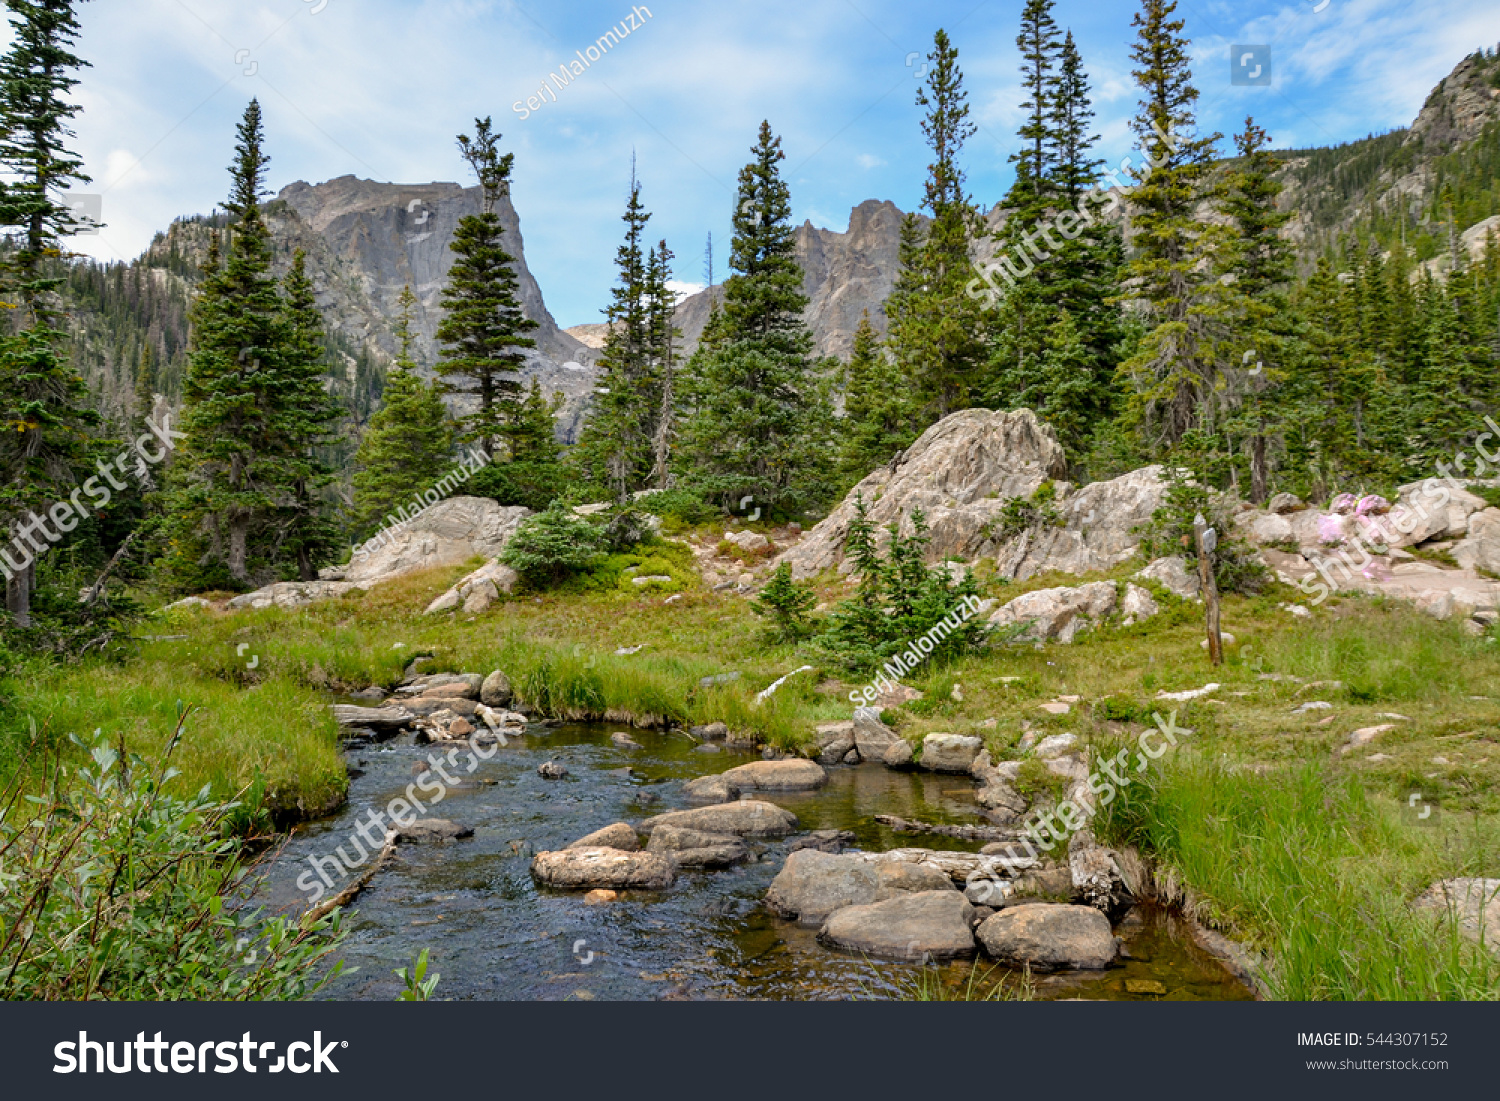 Tyndall creek crossing Emerald Lake trail with Hallett peak in the background
Rocky Mountain National Park, Estes Park, Colorado, United States #544307152